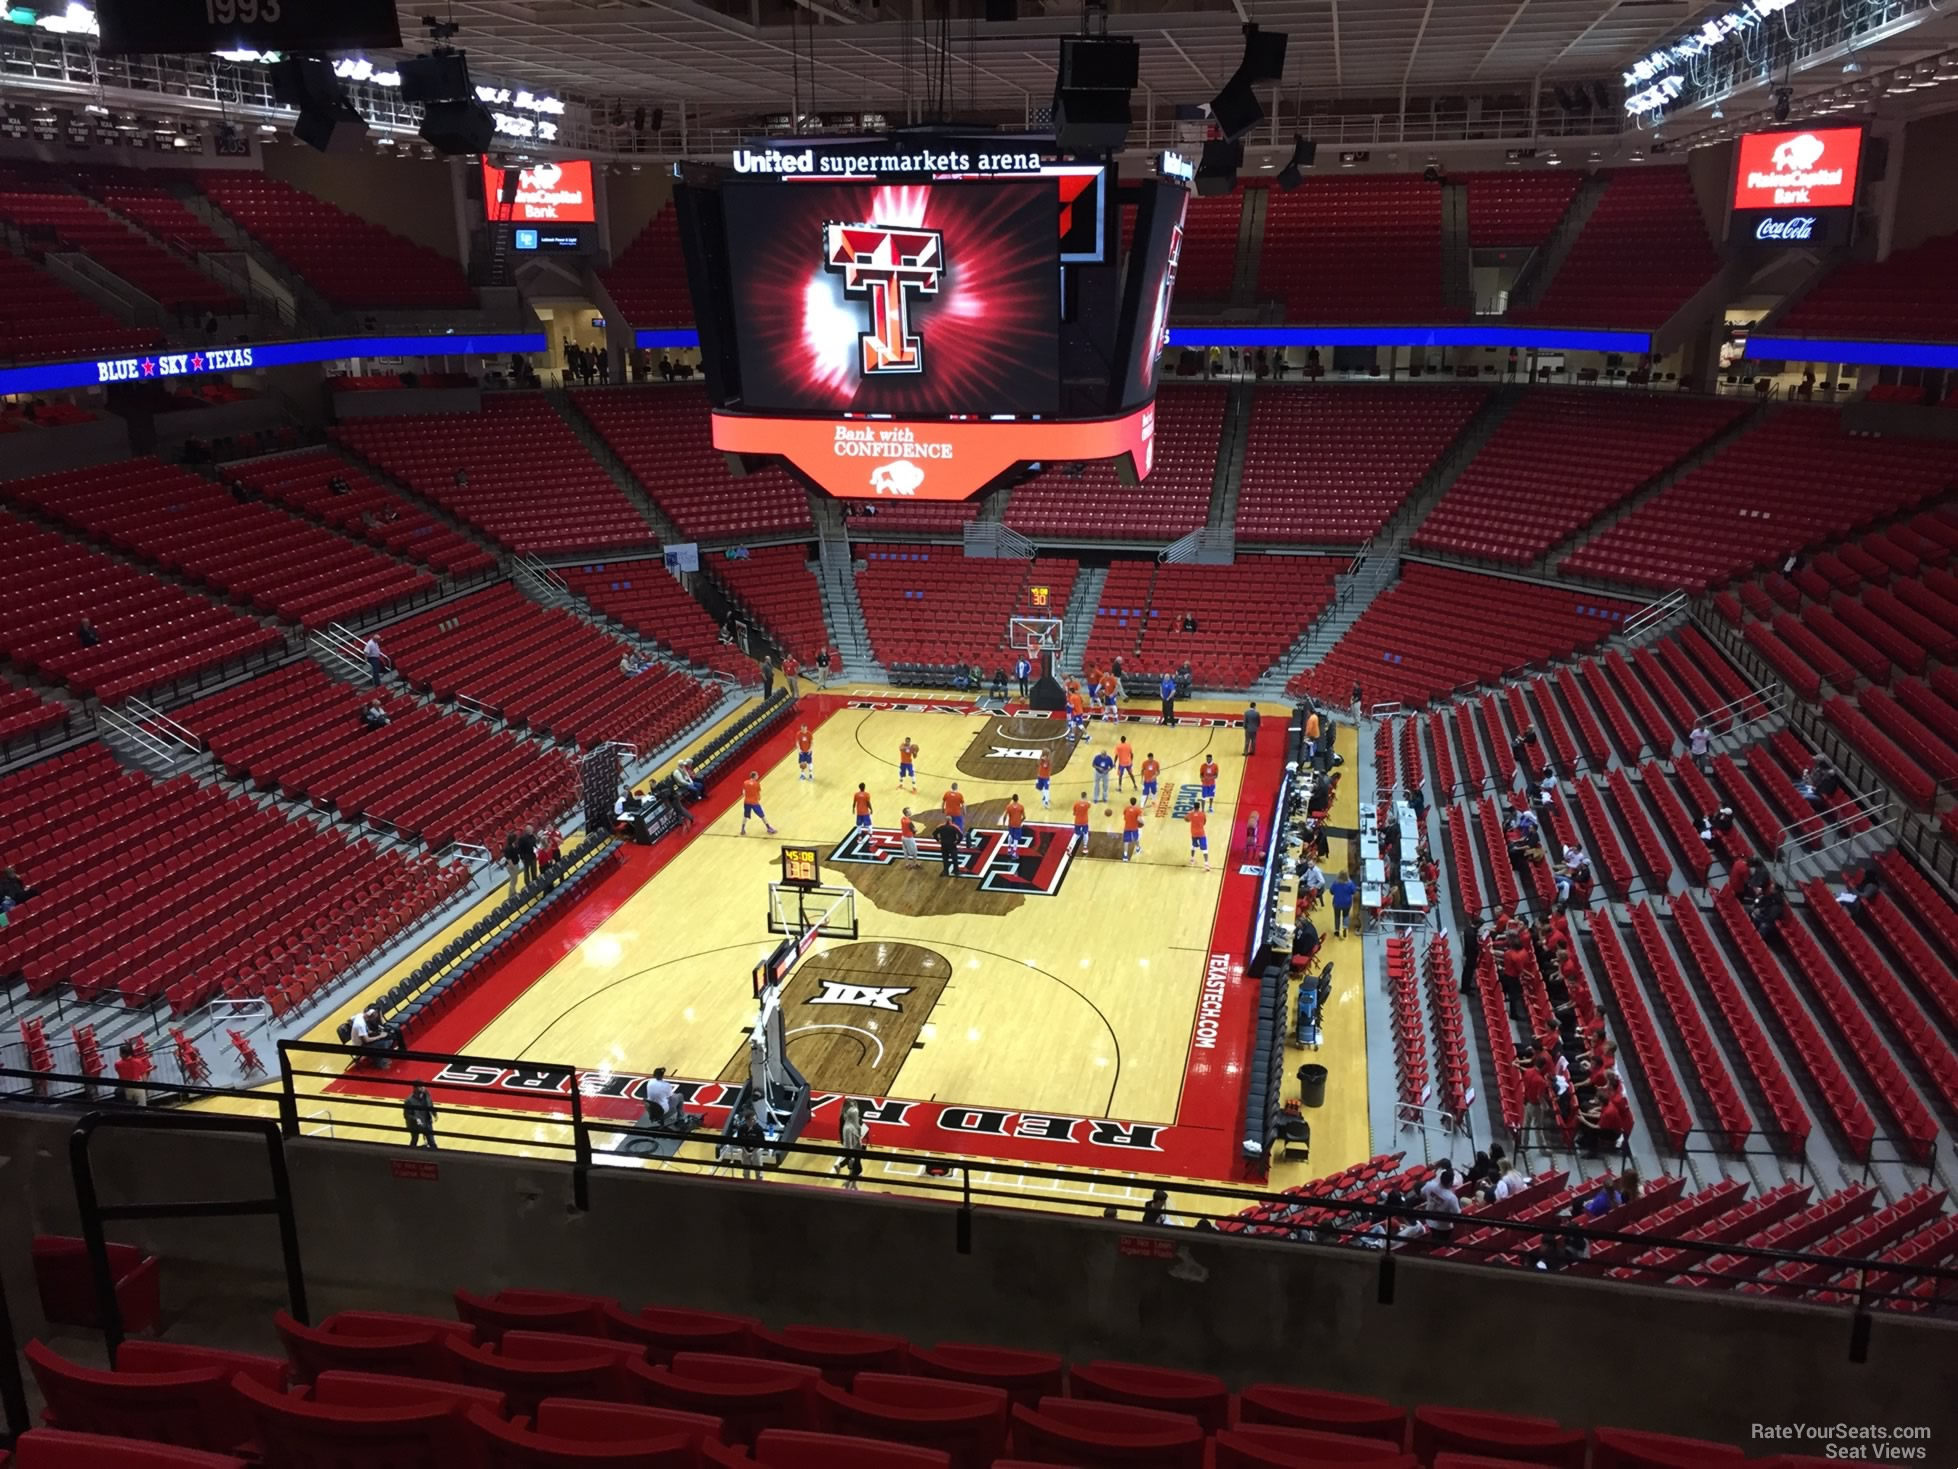 section 222, row 7 seat view  - united supermarkets arena